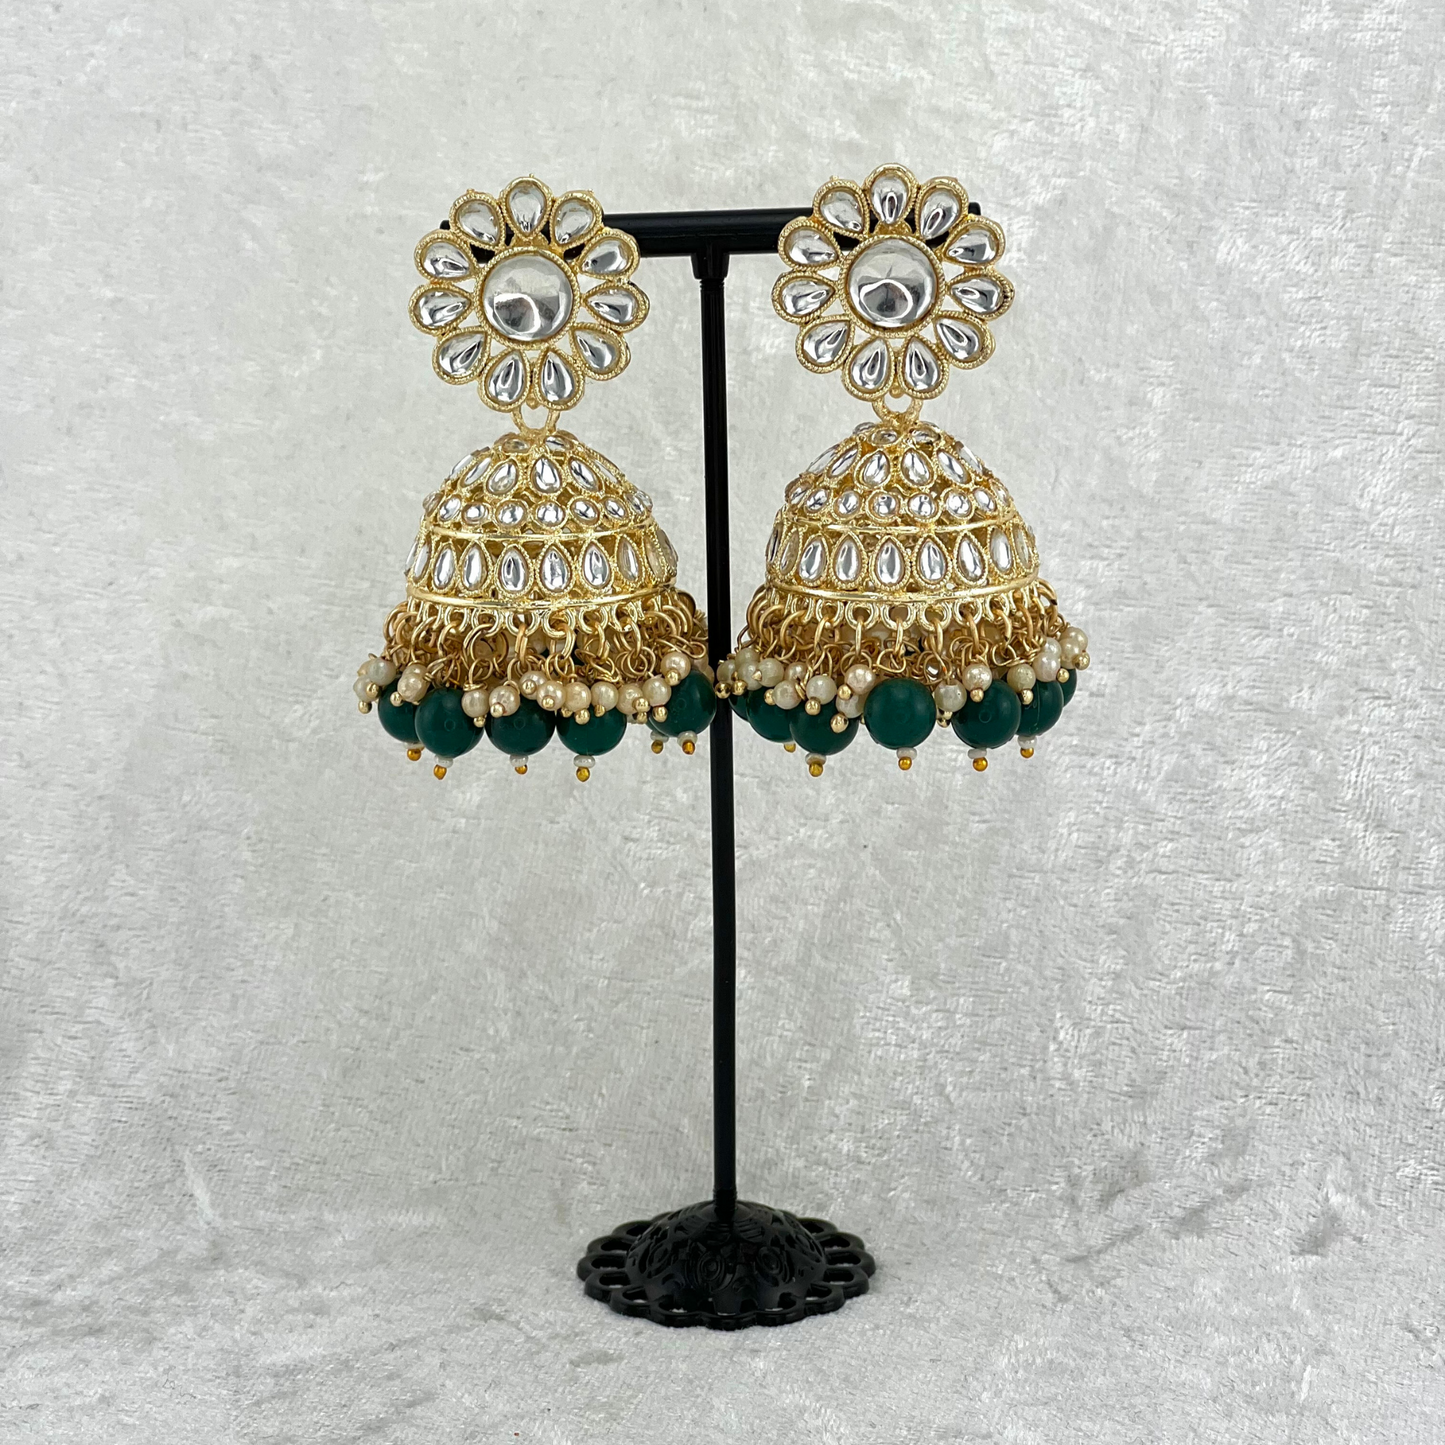 Jhumka earrings in forest green with stones, pearls and beads. Indian wedding jewellery prefect for weddings, parties and special occasions. latest high quality 2022 fashion